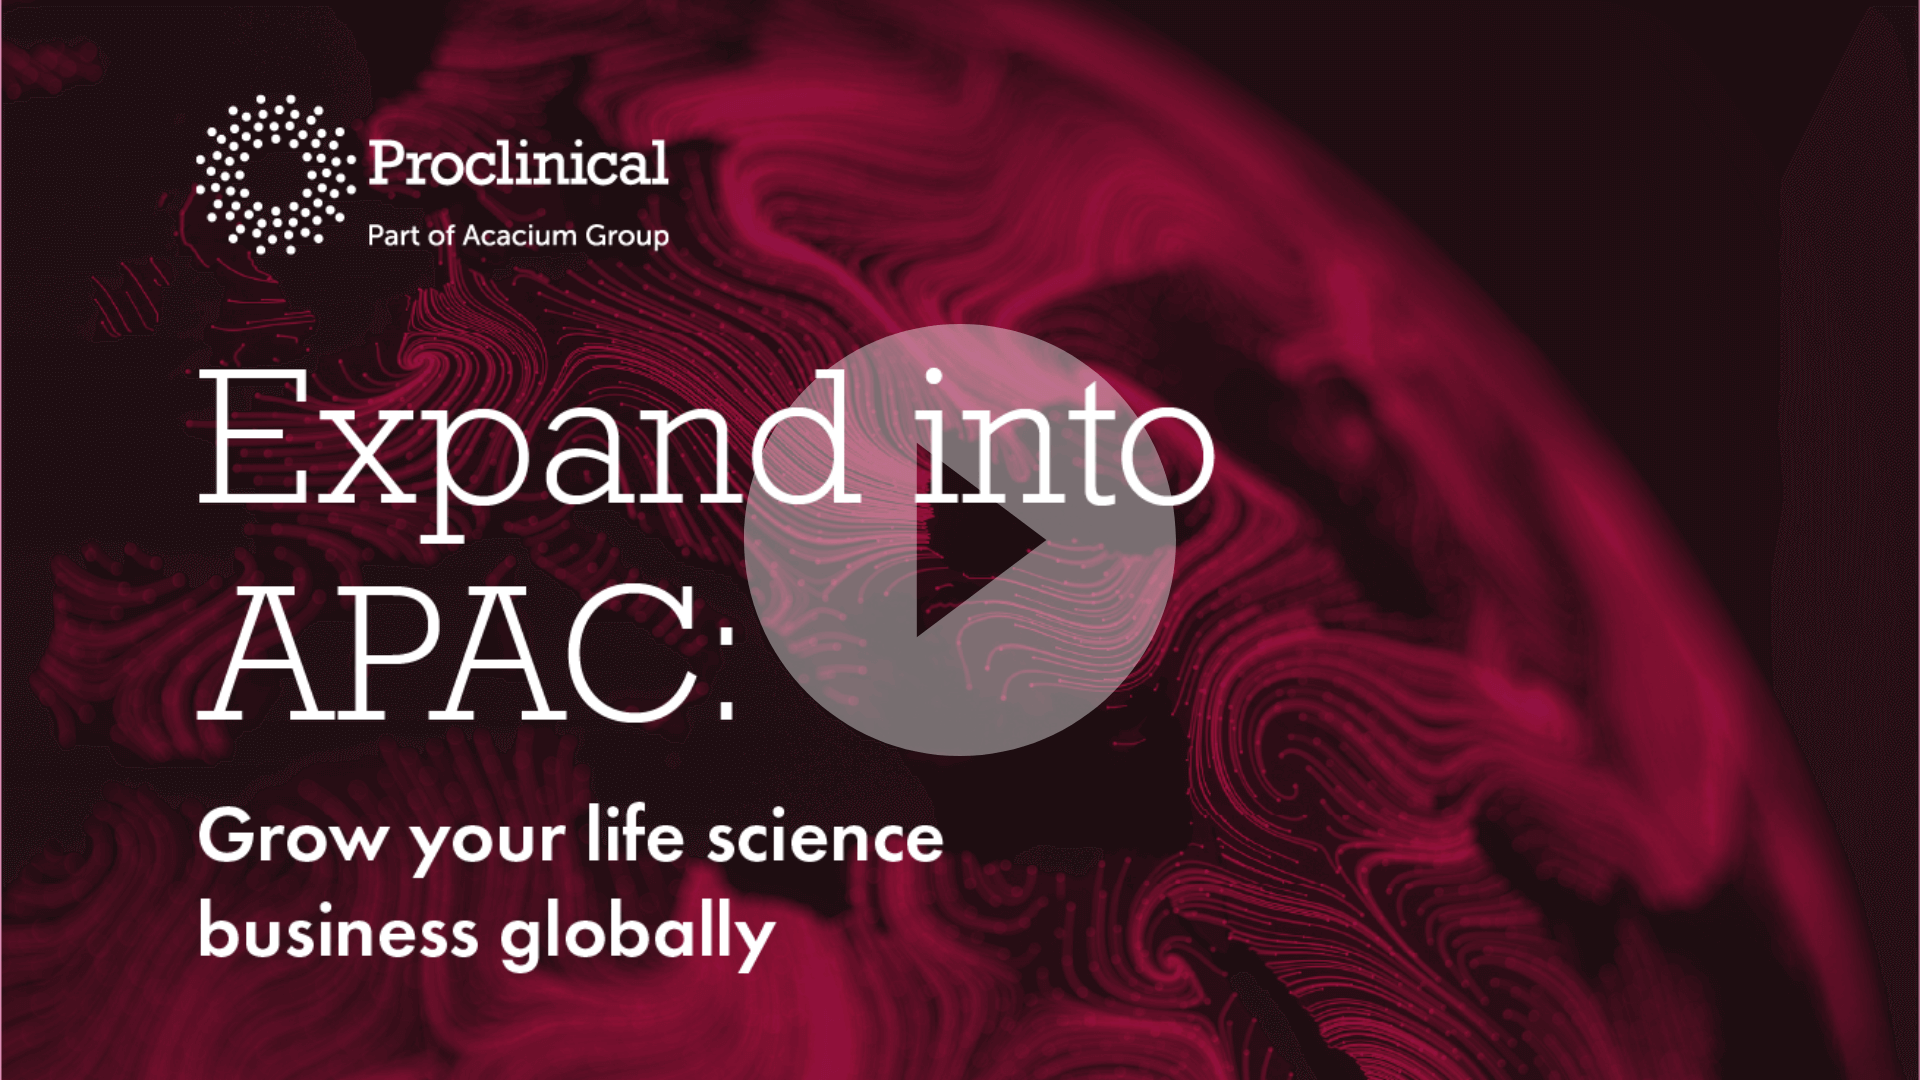 Webinar replay: Expand into APAC - Grow your life science business globally